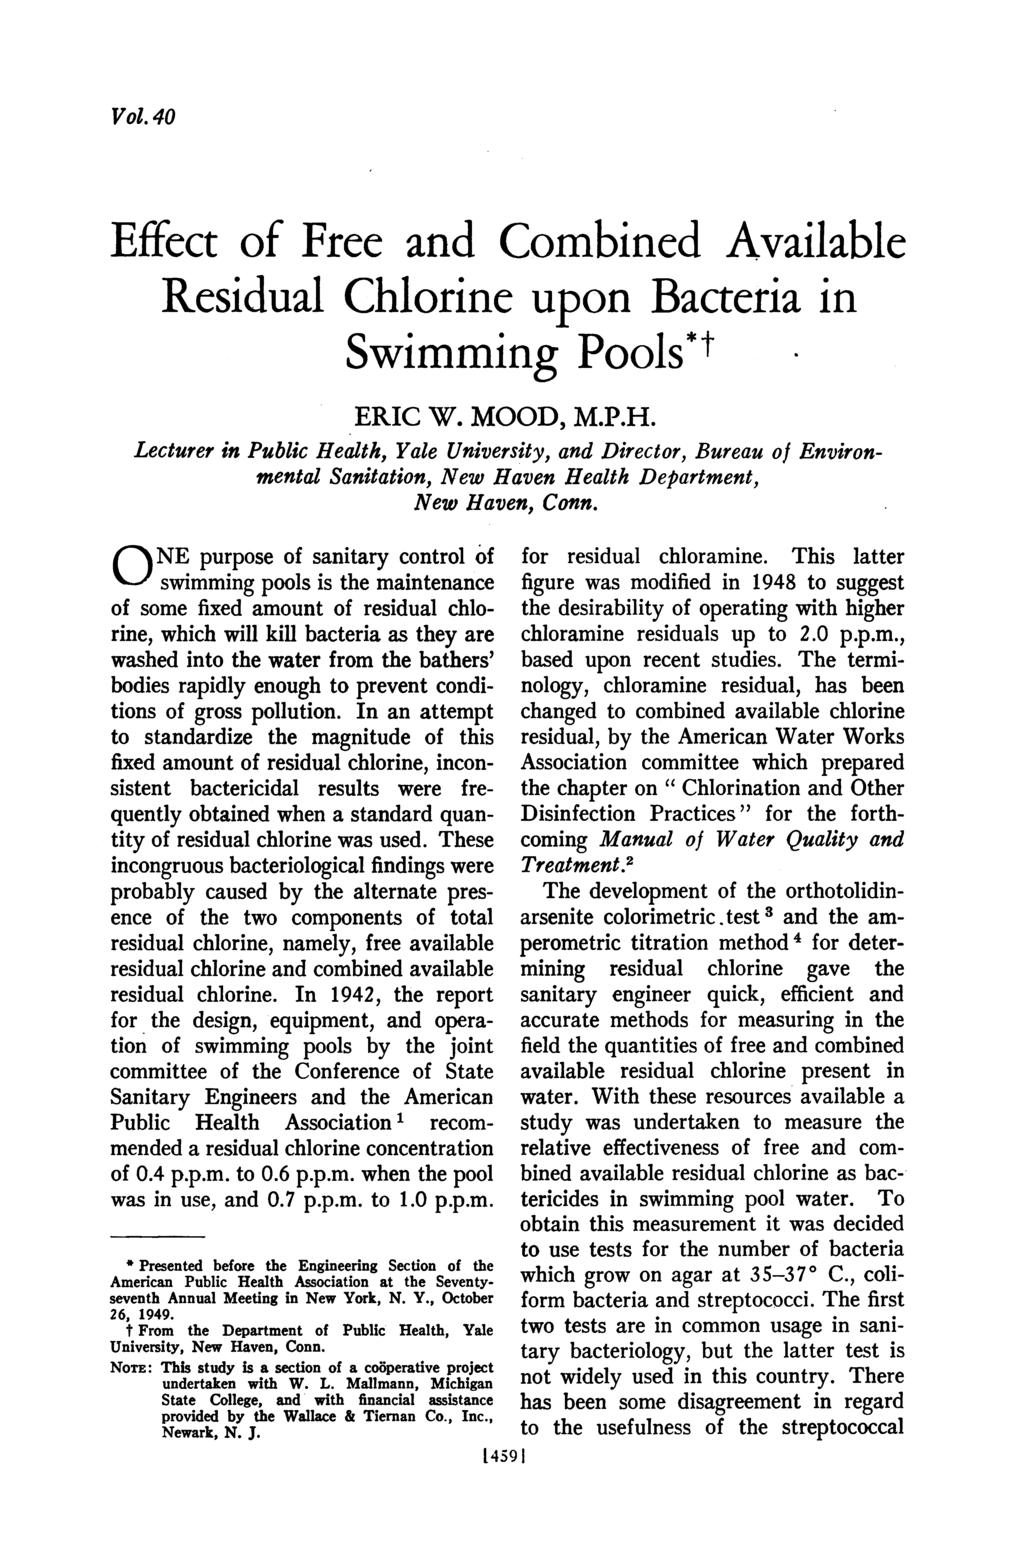 Vol. 4 Effect Residual Chlorine upon Bacteria in Swimming Pools*t of Free and Combined Available ERIC W. MOOD, M.P.H.